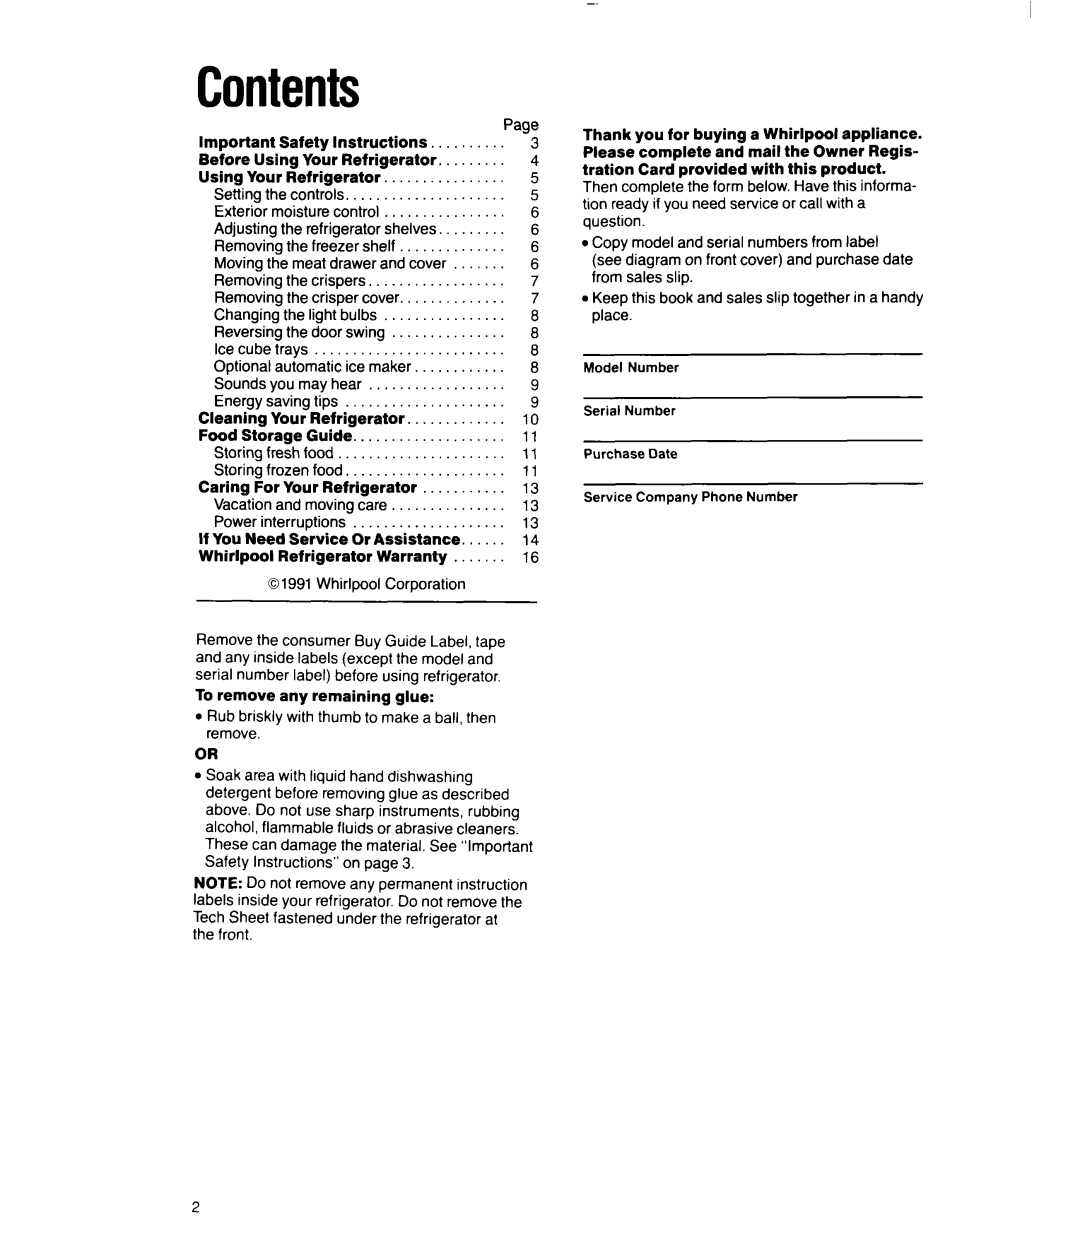 Whirlpool 3Ell8GK manual Contents 